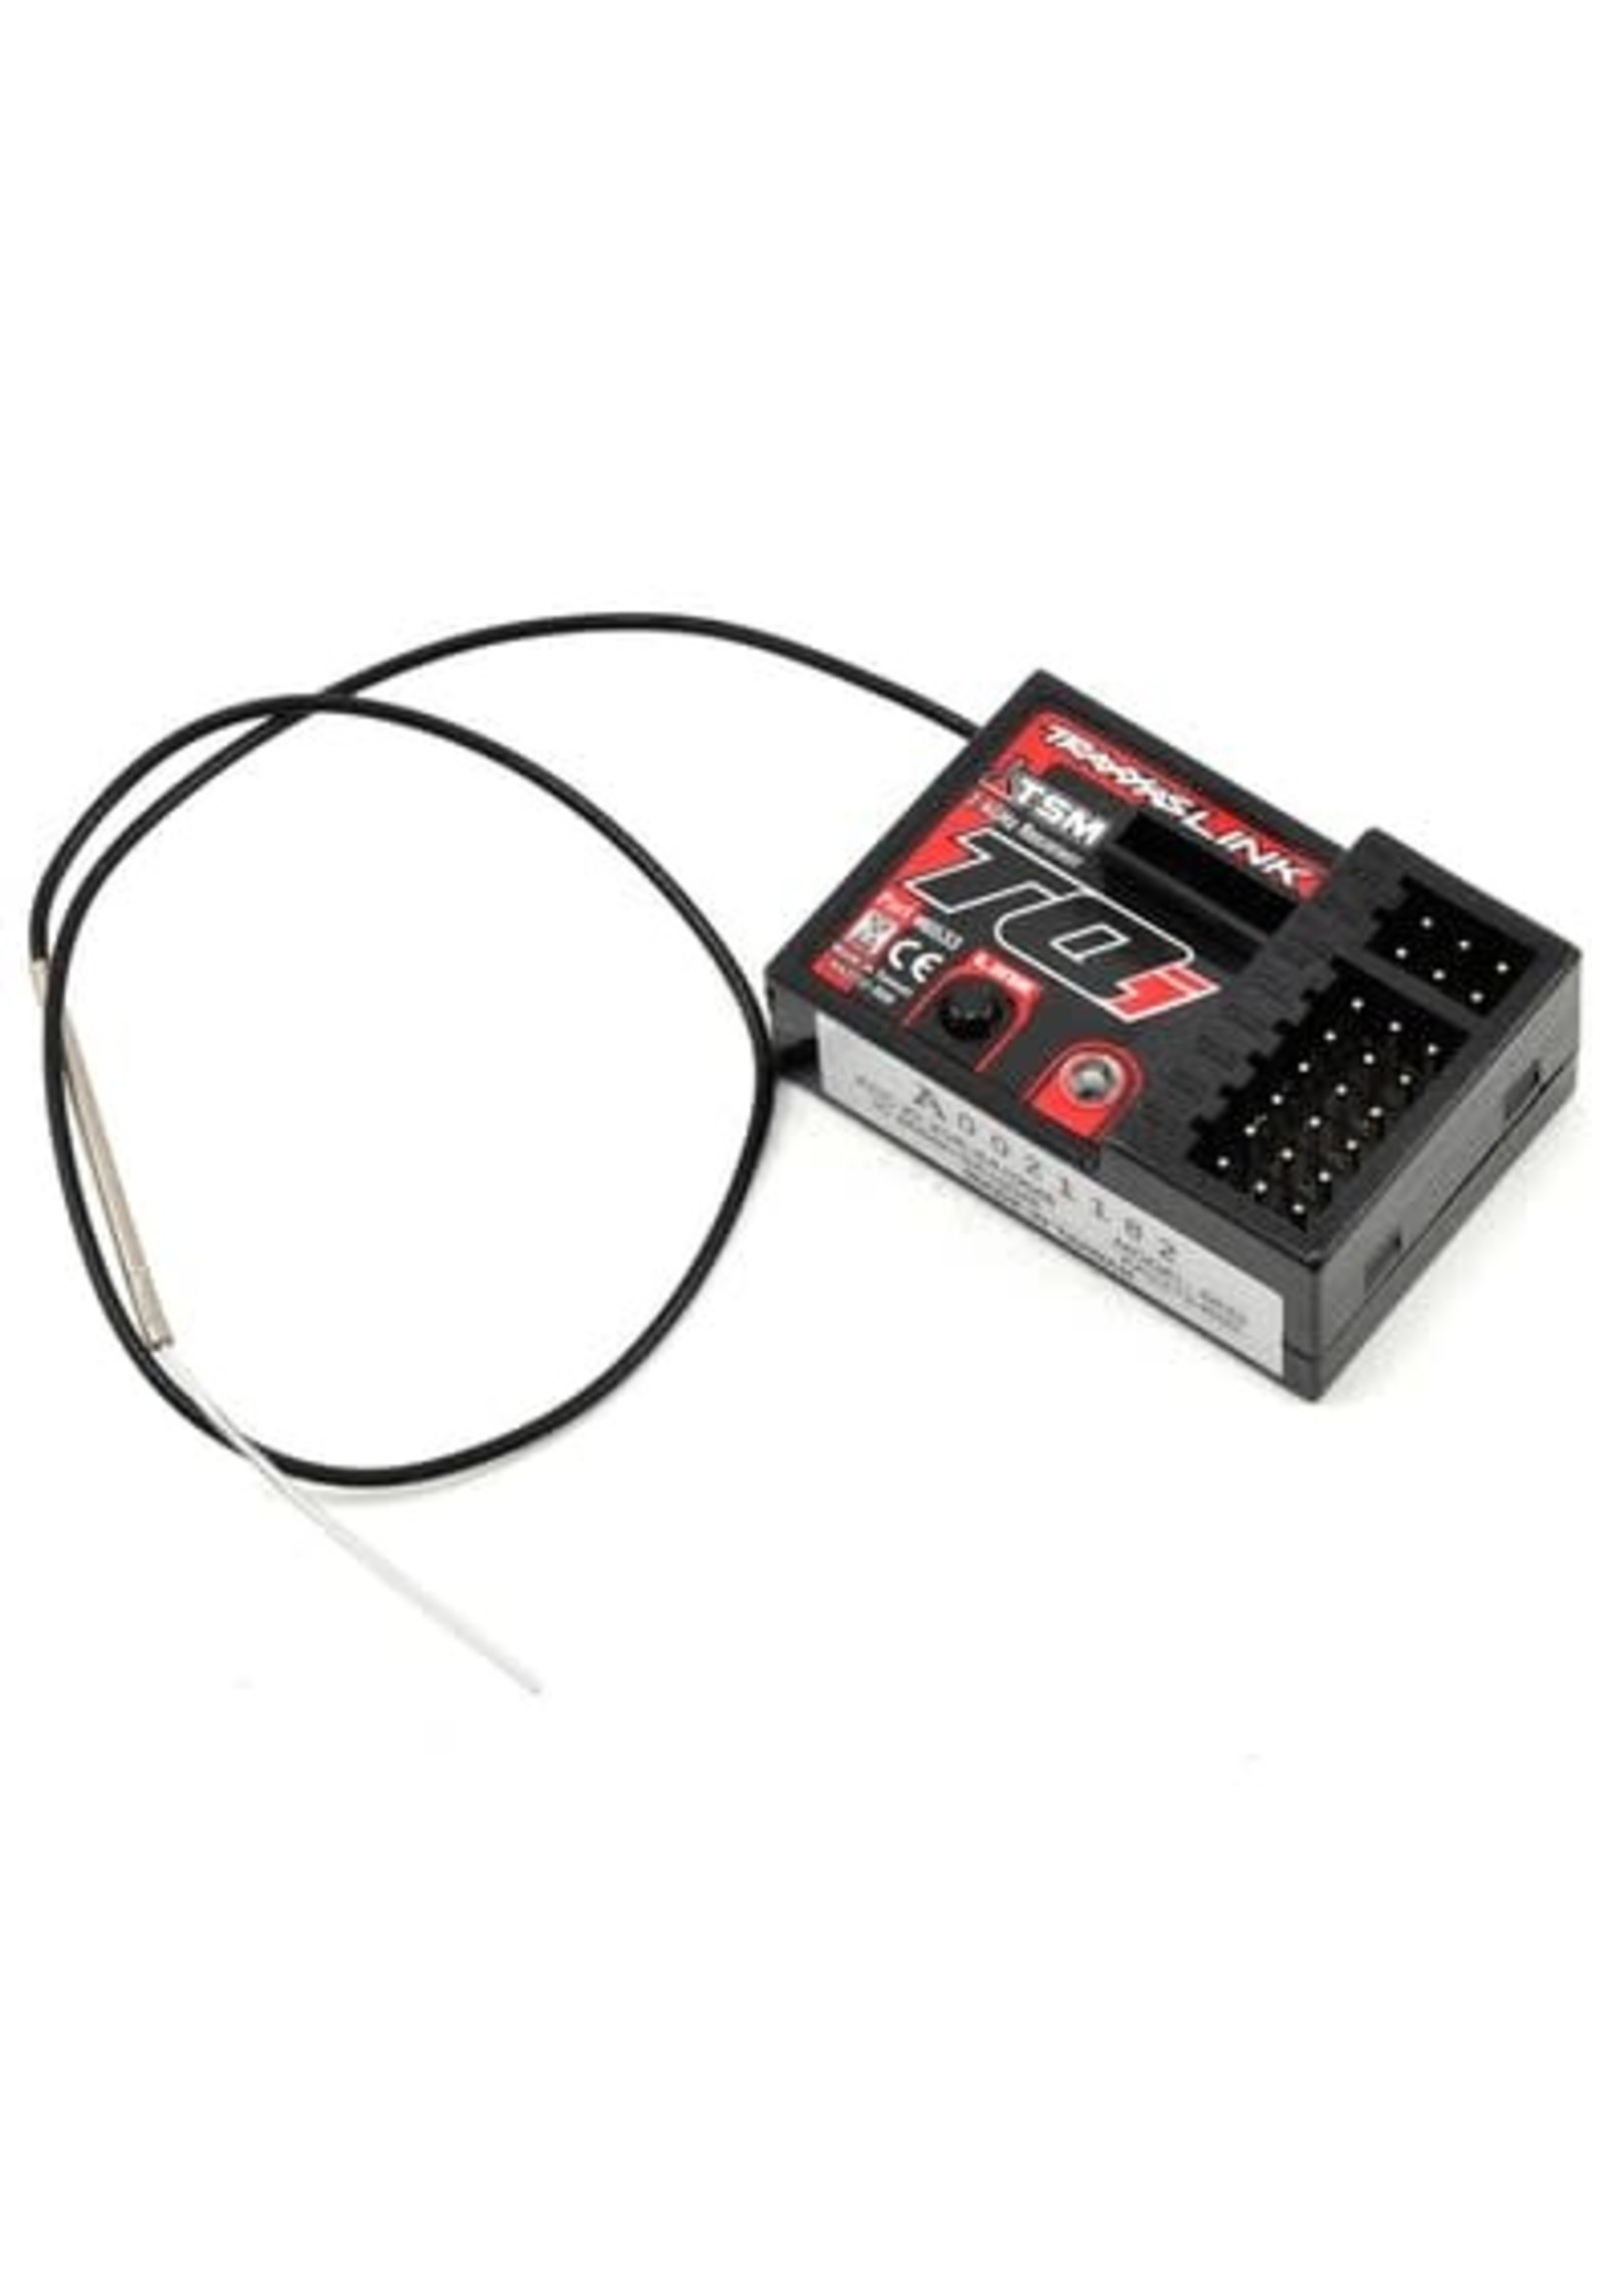 Traxxas 6533 Receiver, micro, TQi 2.4GHz with telemetry & TSM (5-channel)